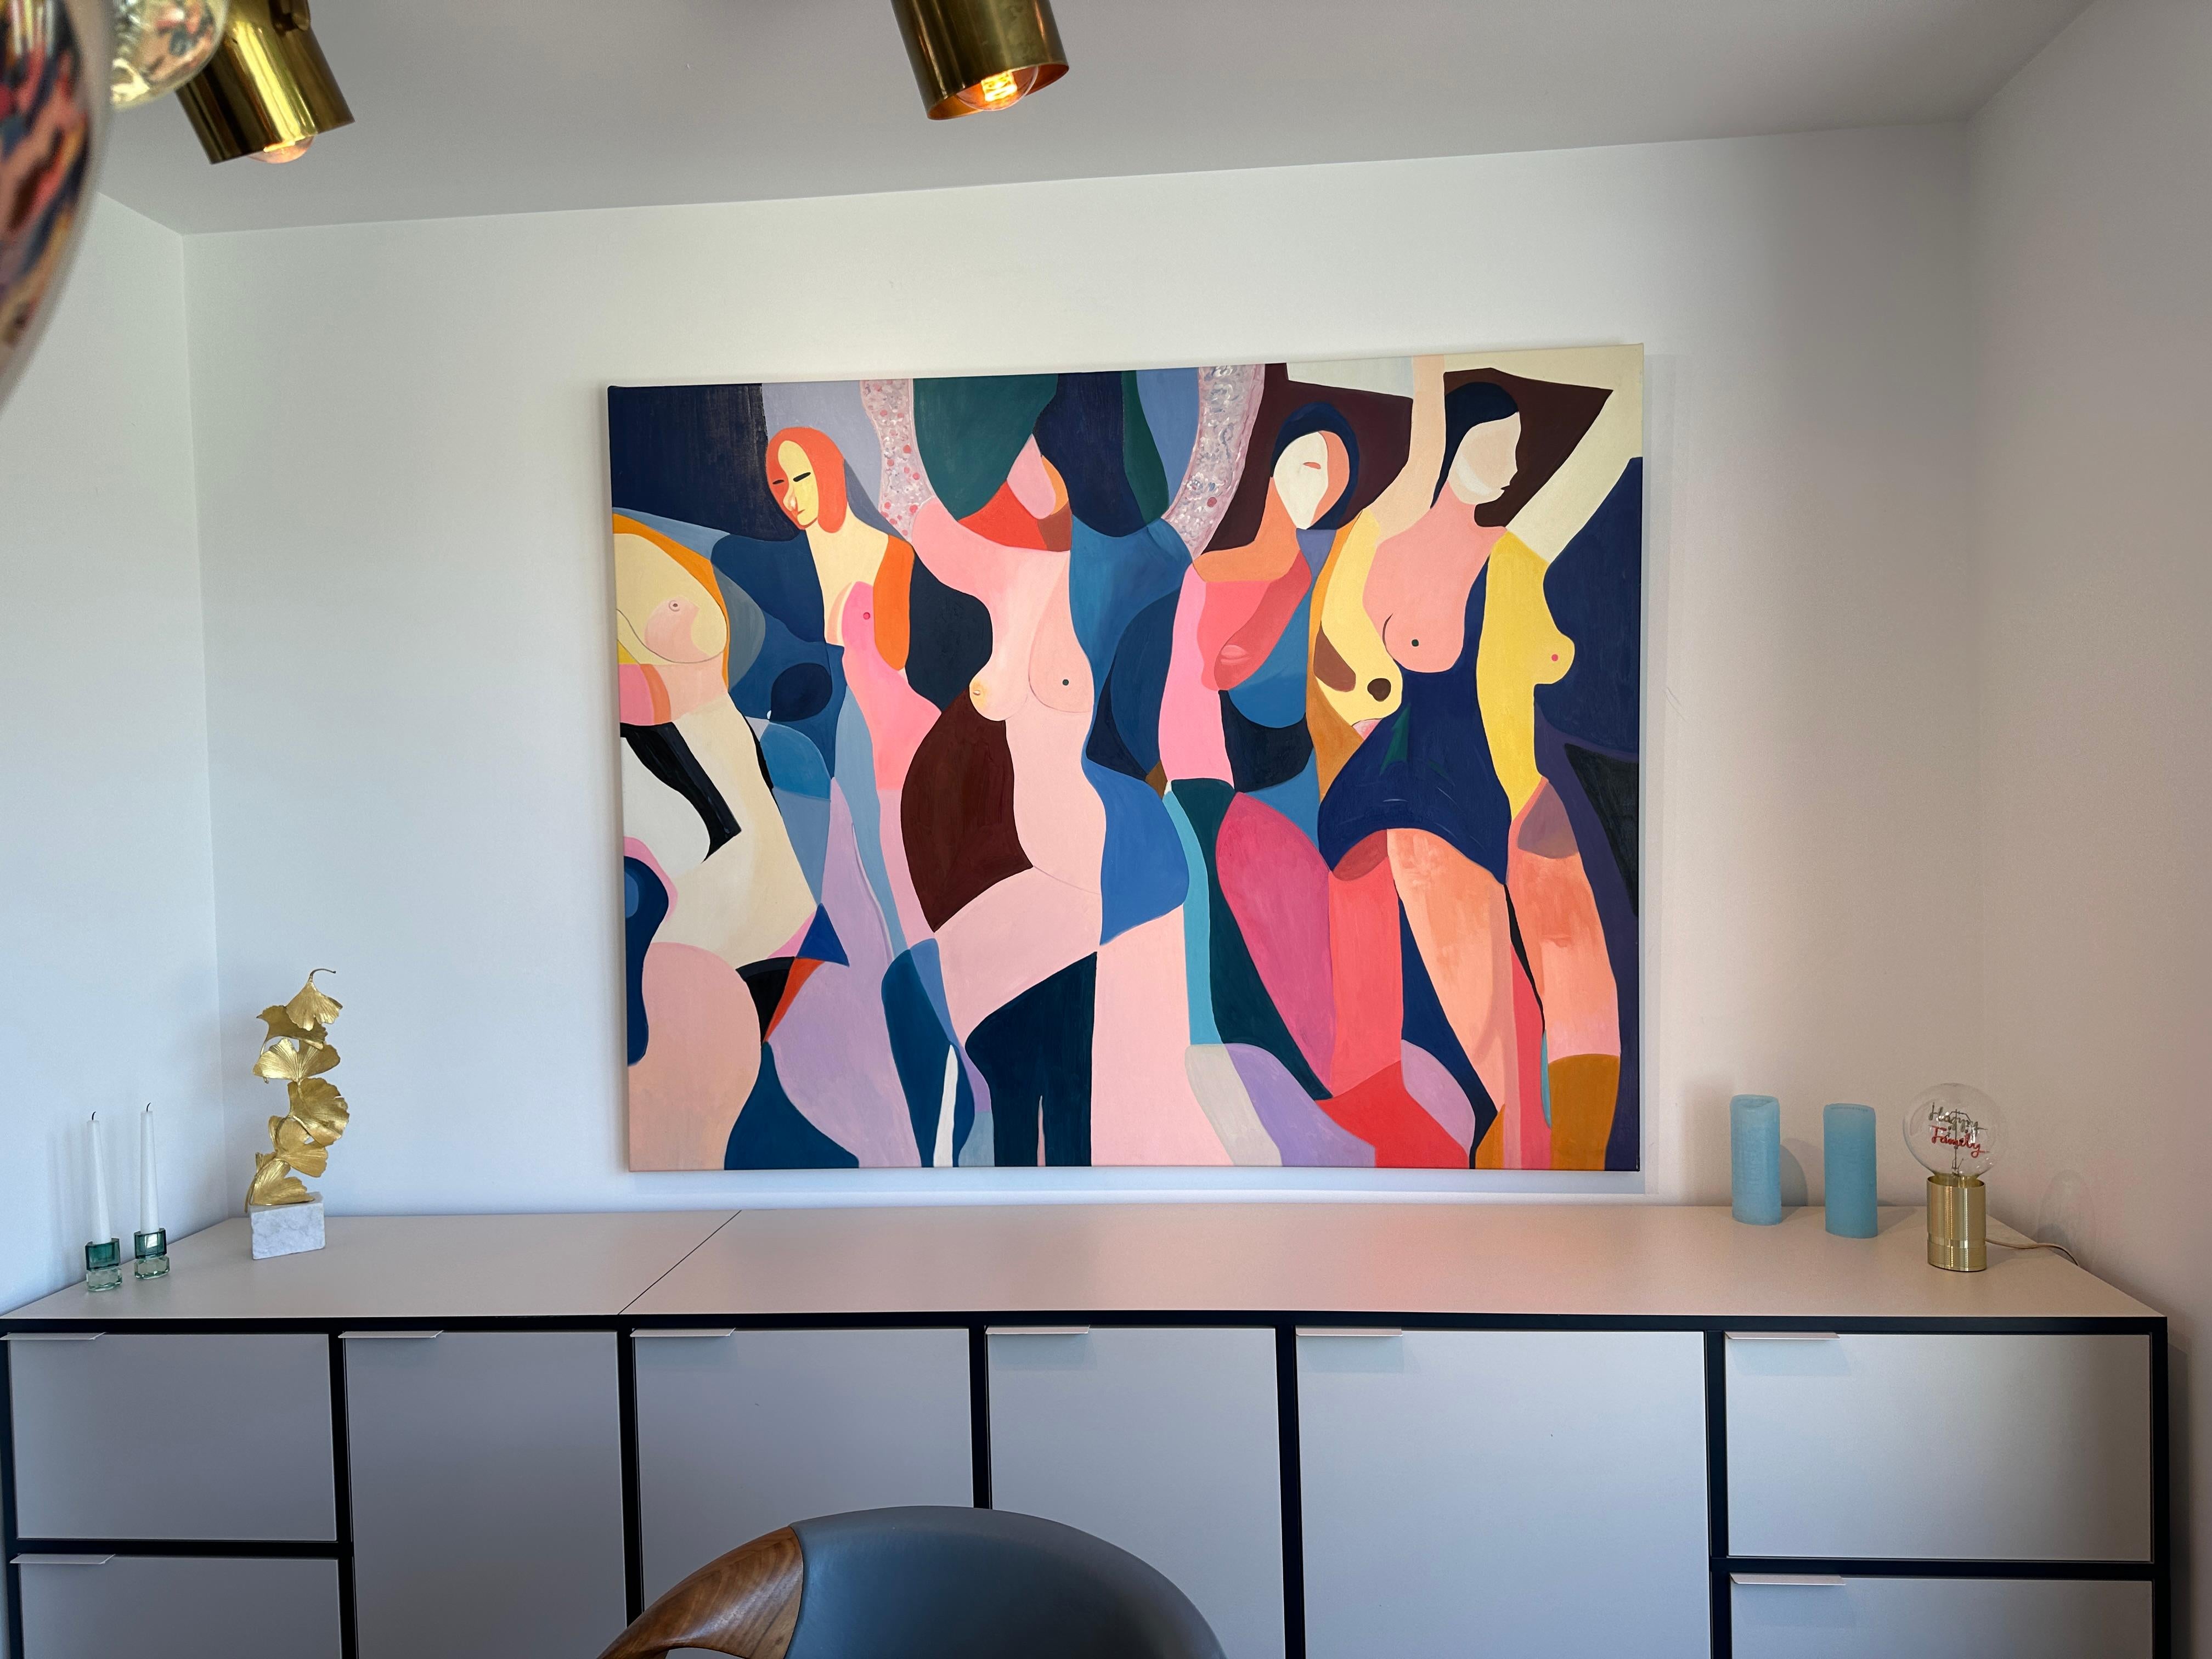 In general, her paintings are joyful geometric abstractions of the female bodies, with color parcels interacting or overlapping. Her figures are at ease with their bodies and are unique and vibrant. 
Hormel is inspired by Picasso’s figurative